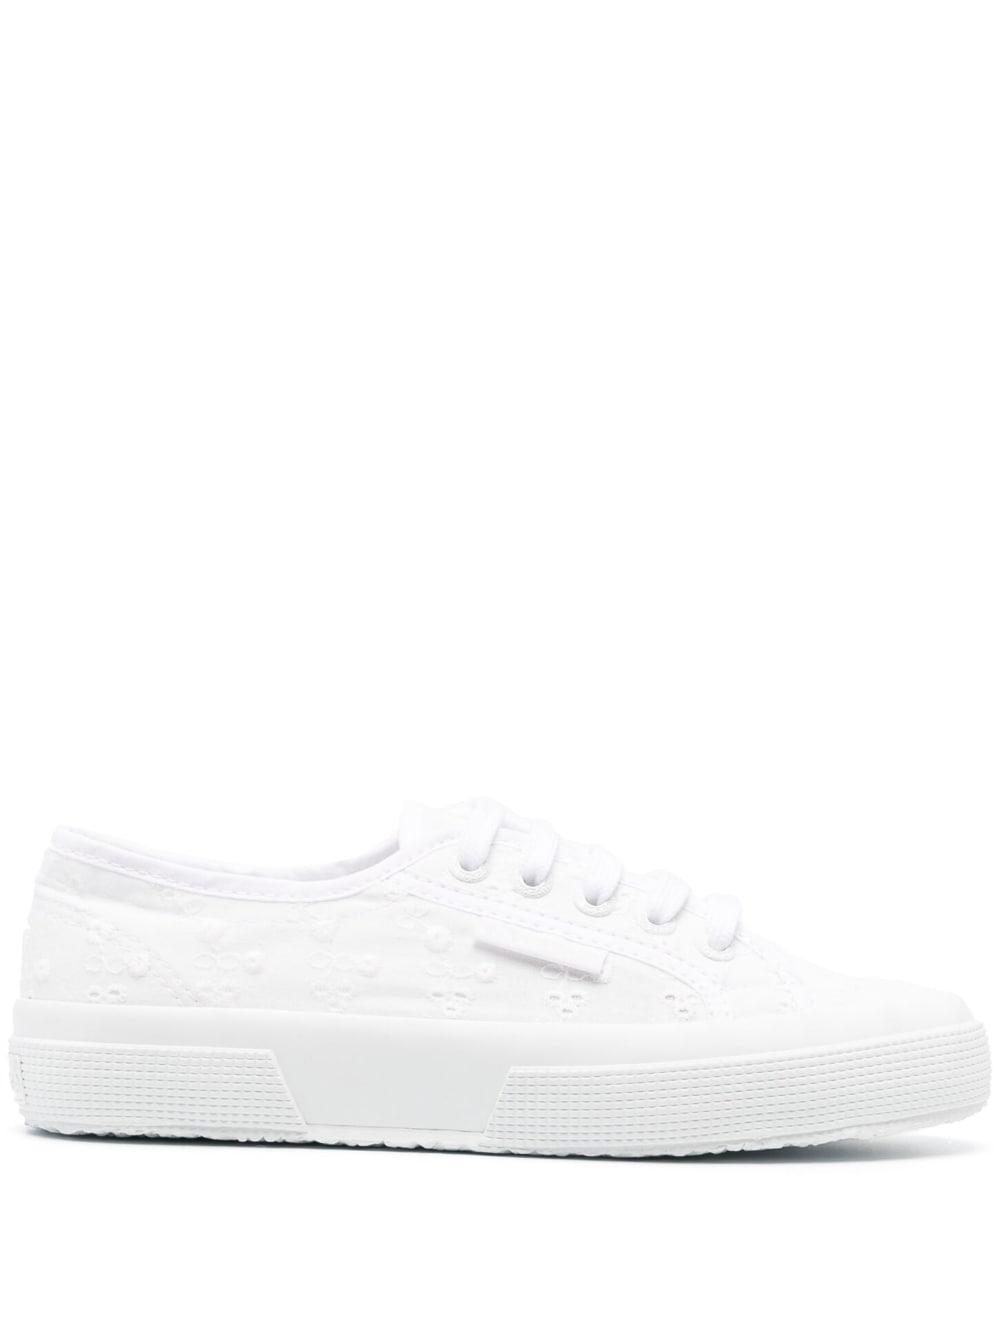 Superga 2750 Sangallo Low-top Sneakers in White | Lyst